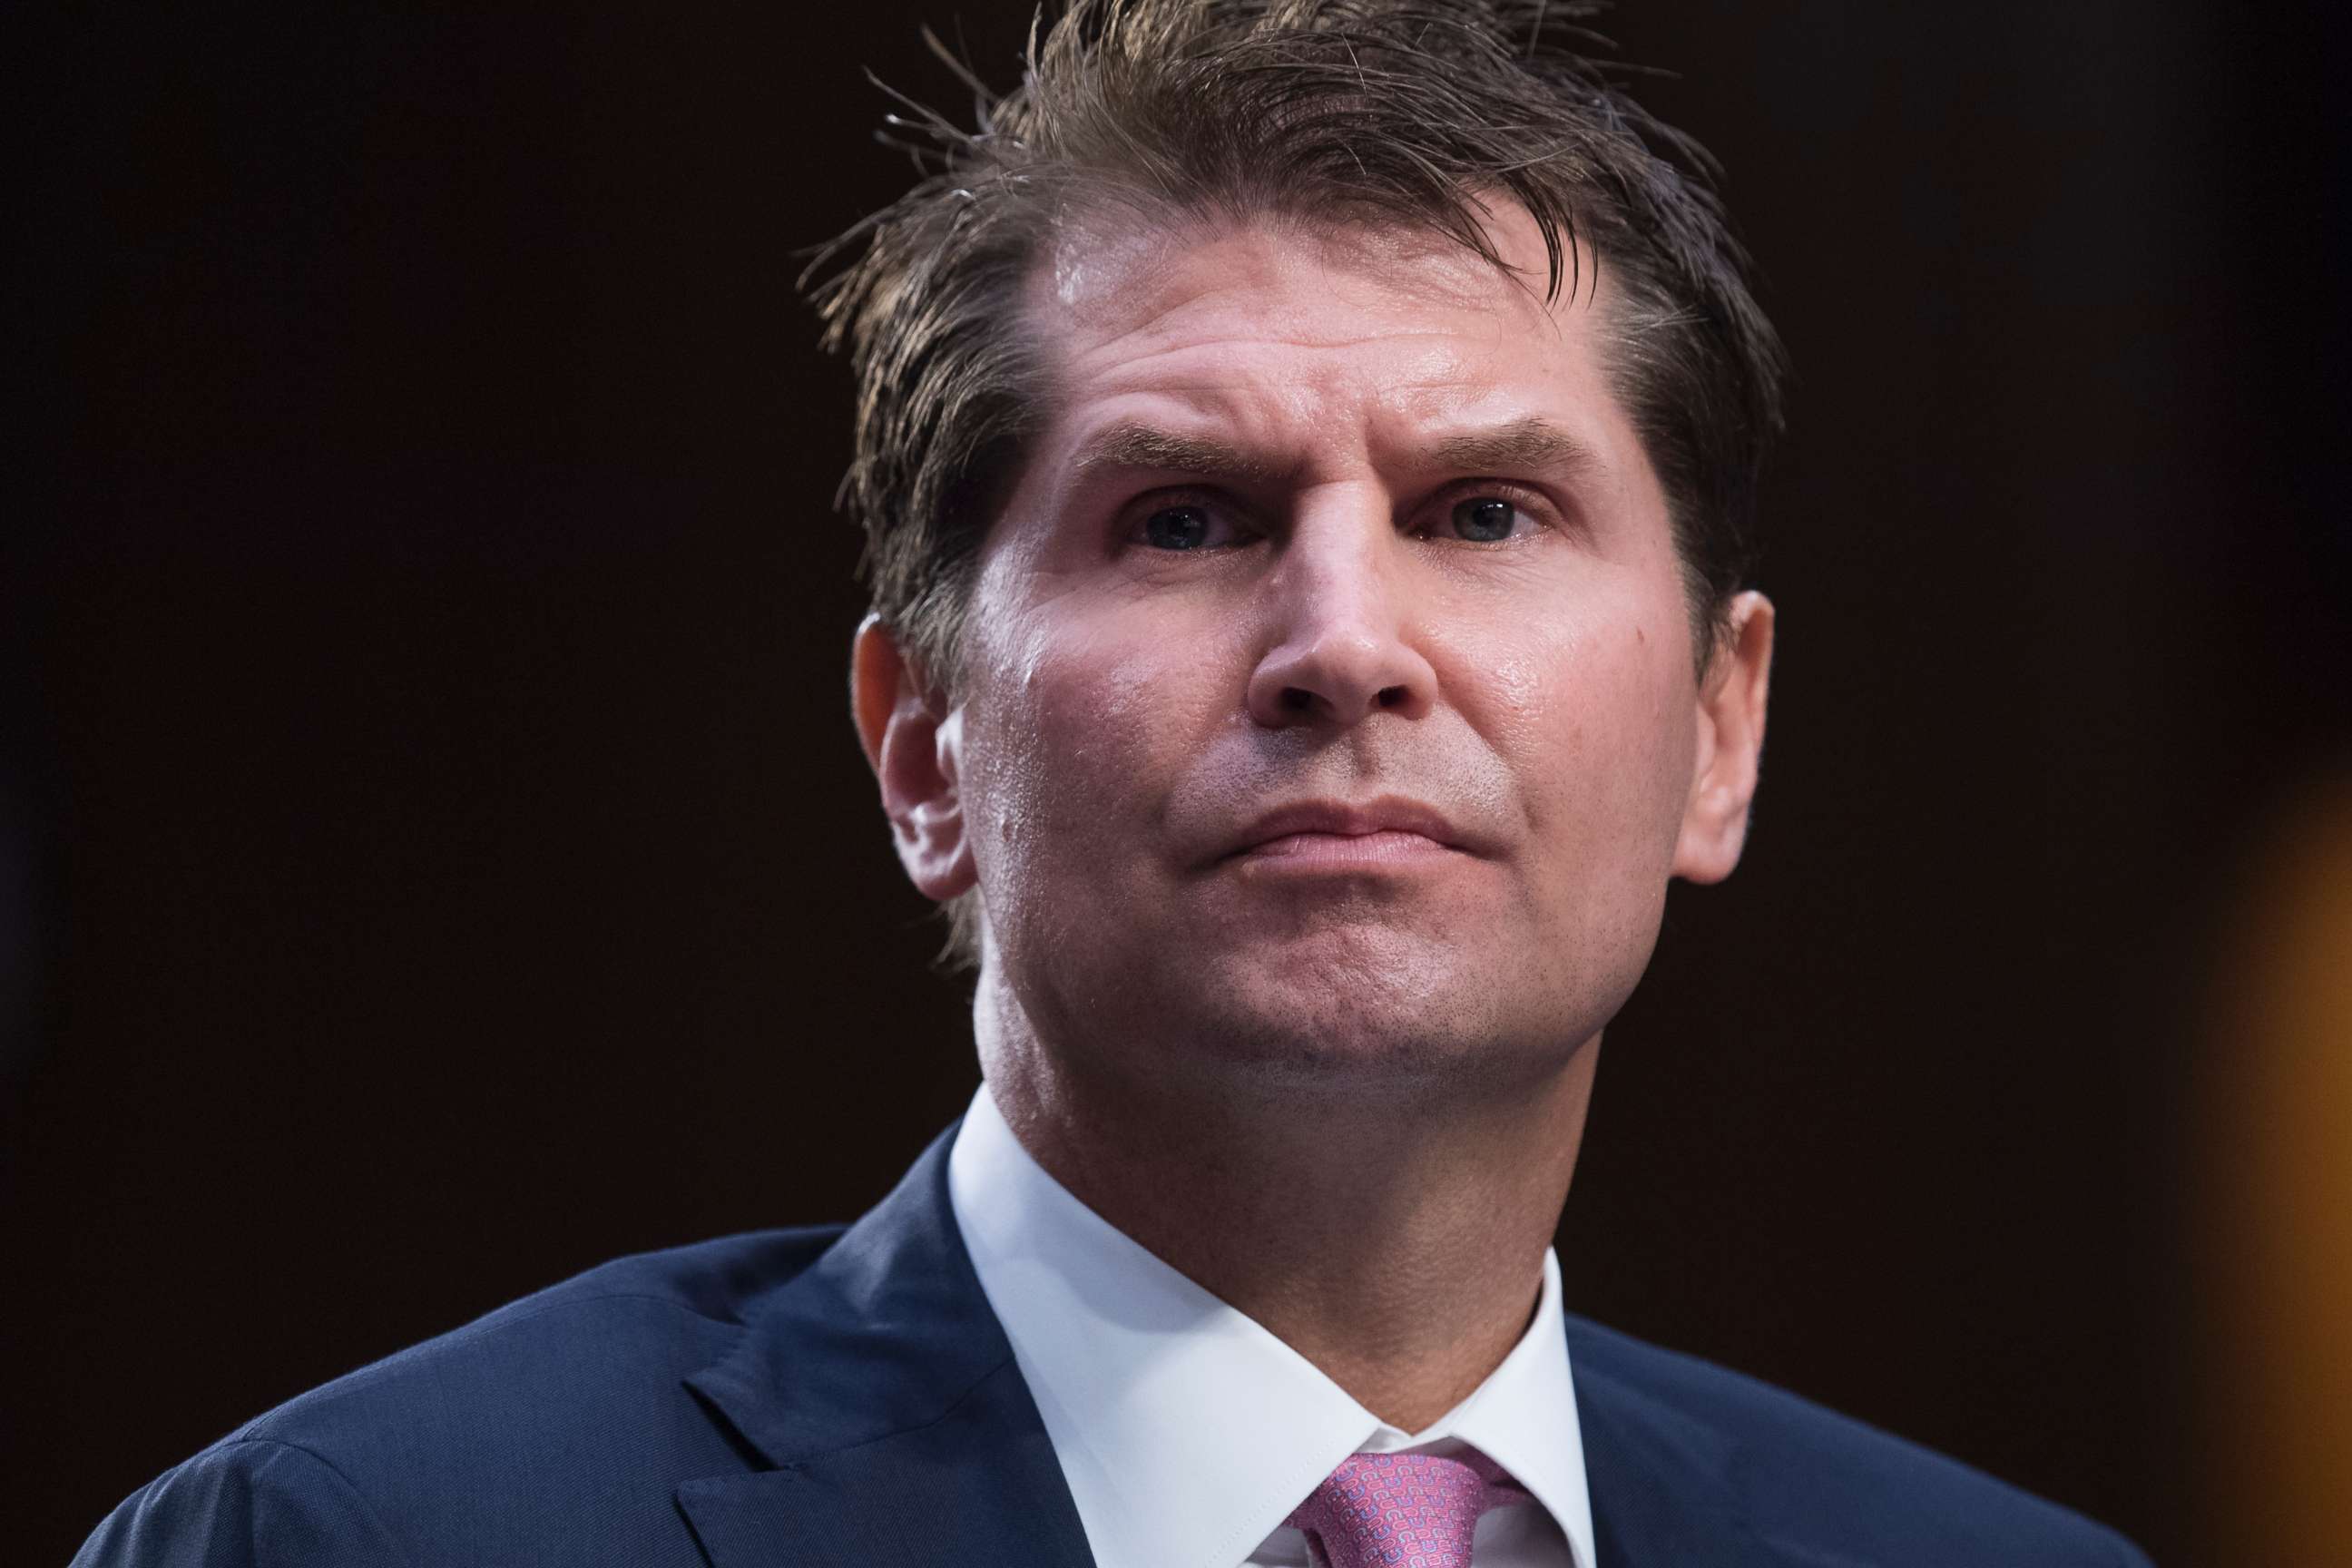 PHOTO: Bill Priestap, assistant director of the FBI's counterintelligence division, testifies before a Senate Judiciary Committee, July 26, 2017.